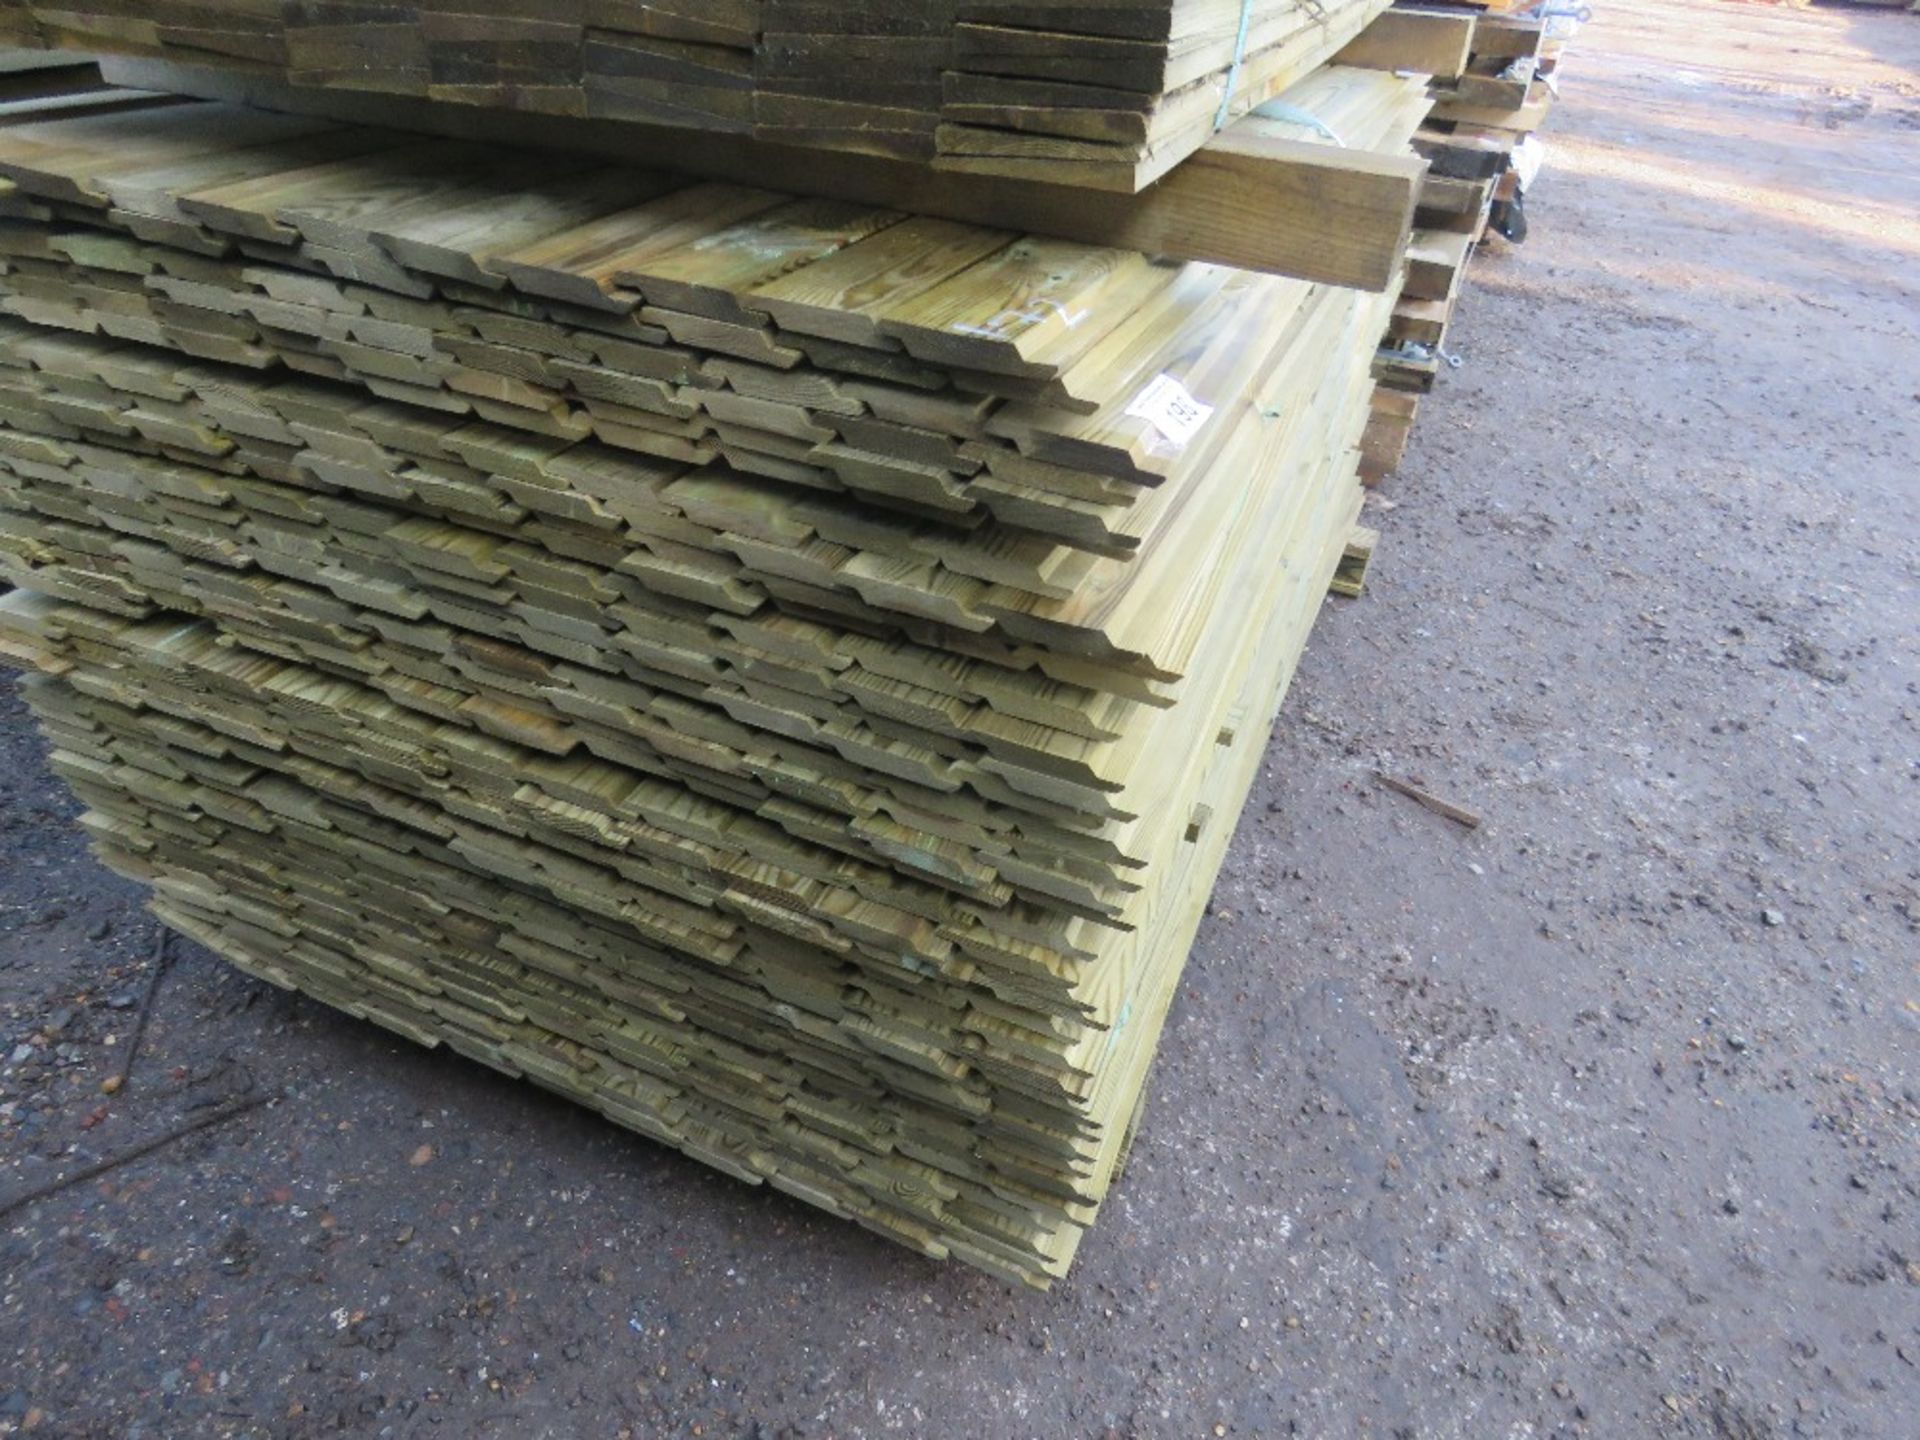 LARGE BUNDLE OF PRESSURE TREATED SHIPLAP TIMBER CLADDING: 1.72M LENGTH X 10CM WIDTH APPROX. - Image 2 of 3